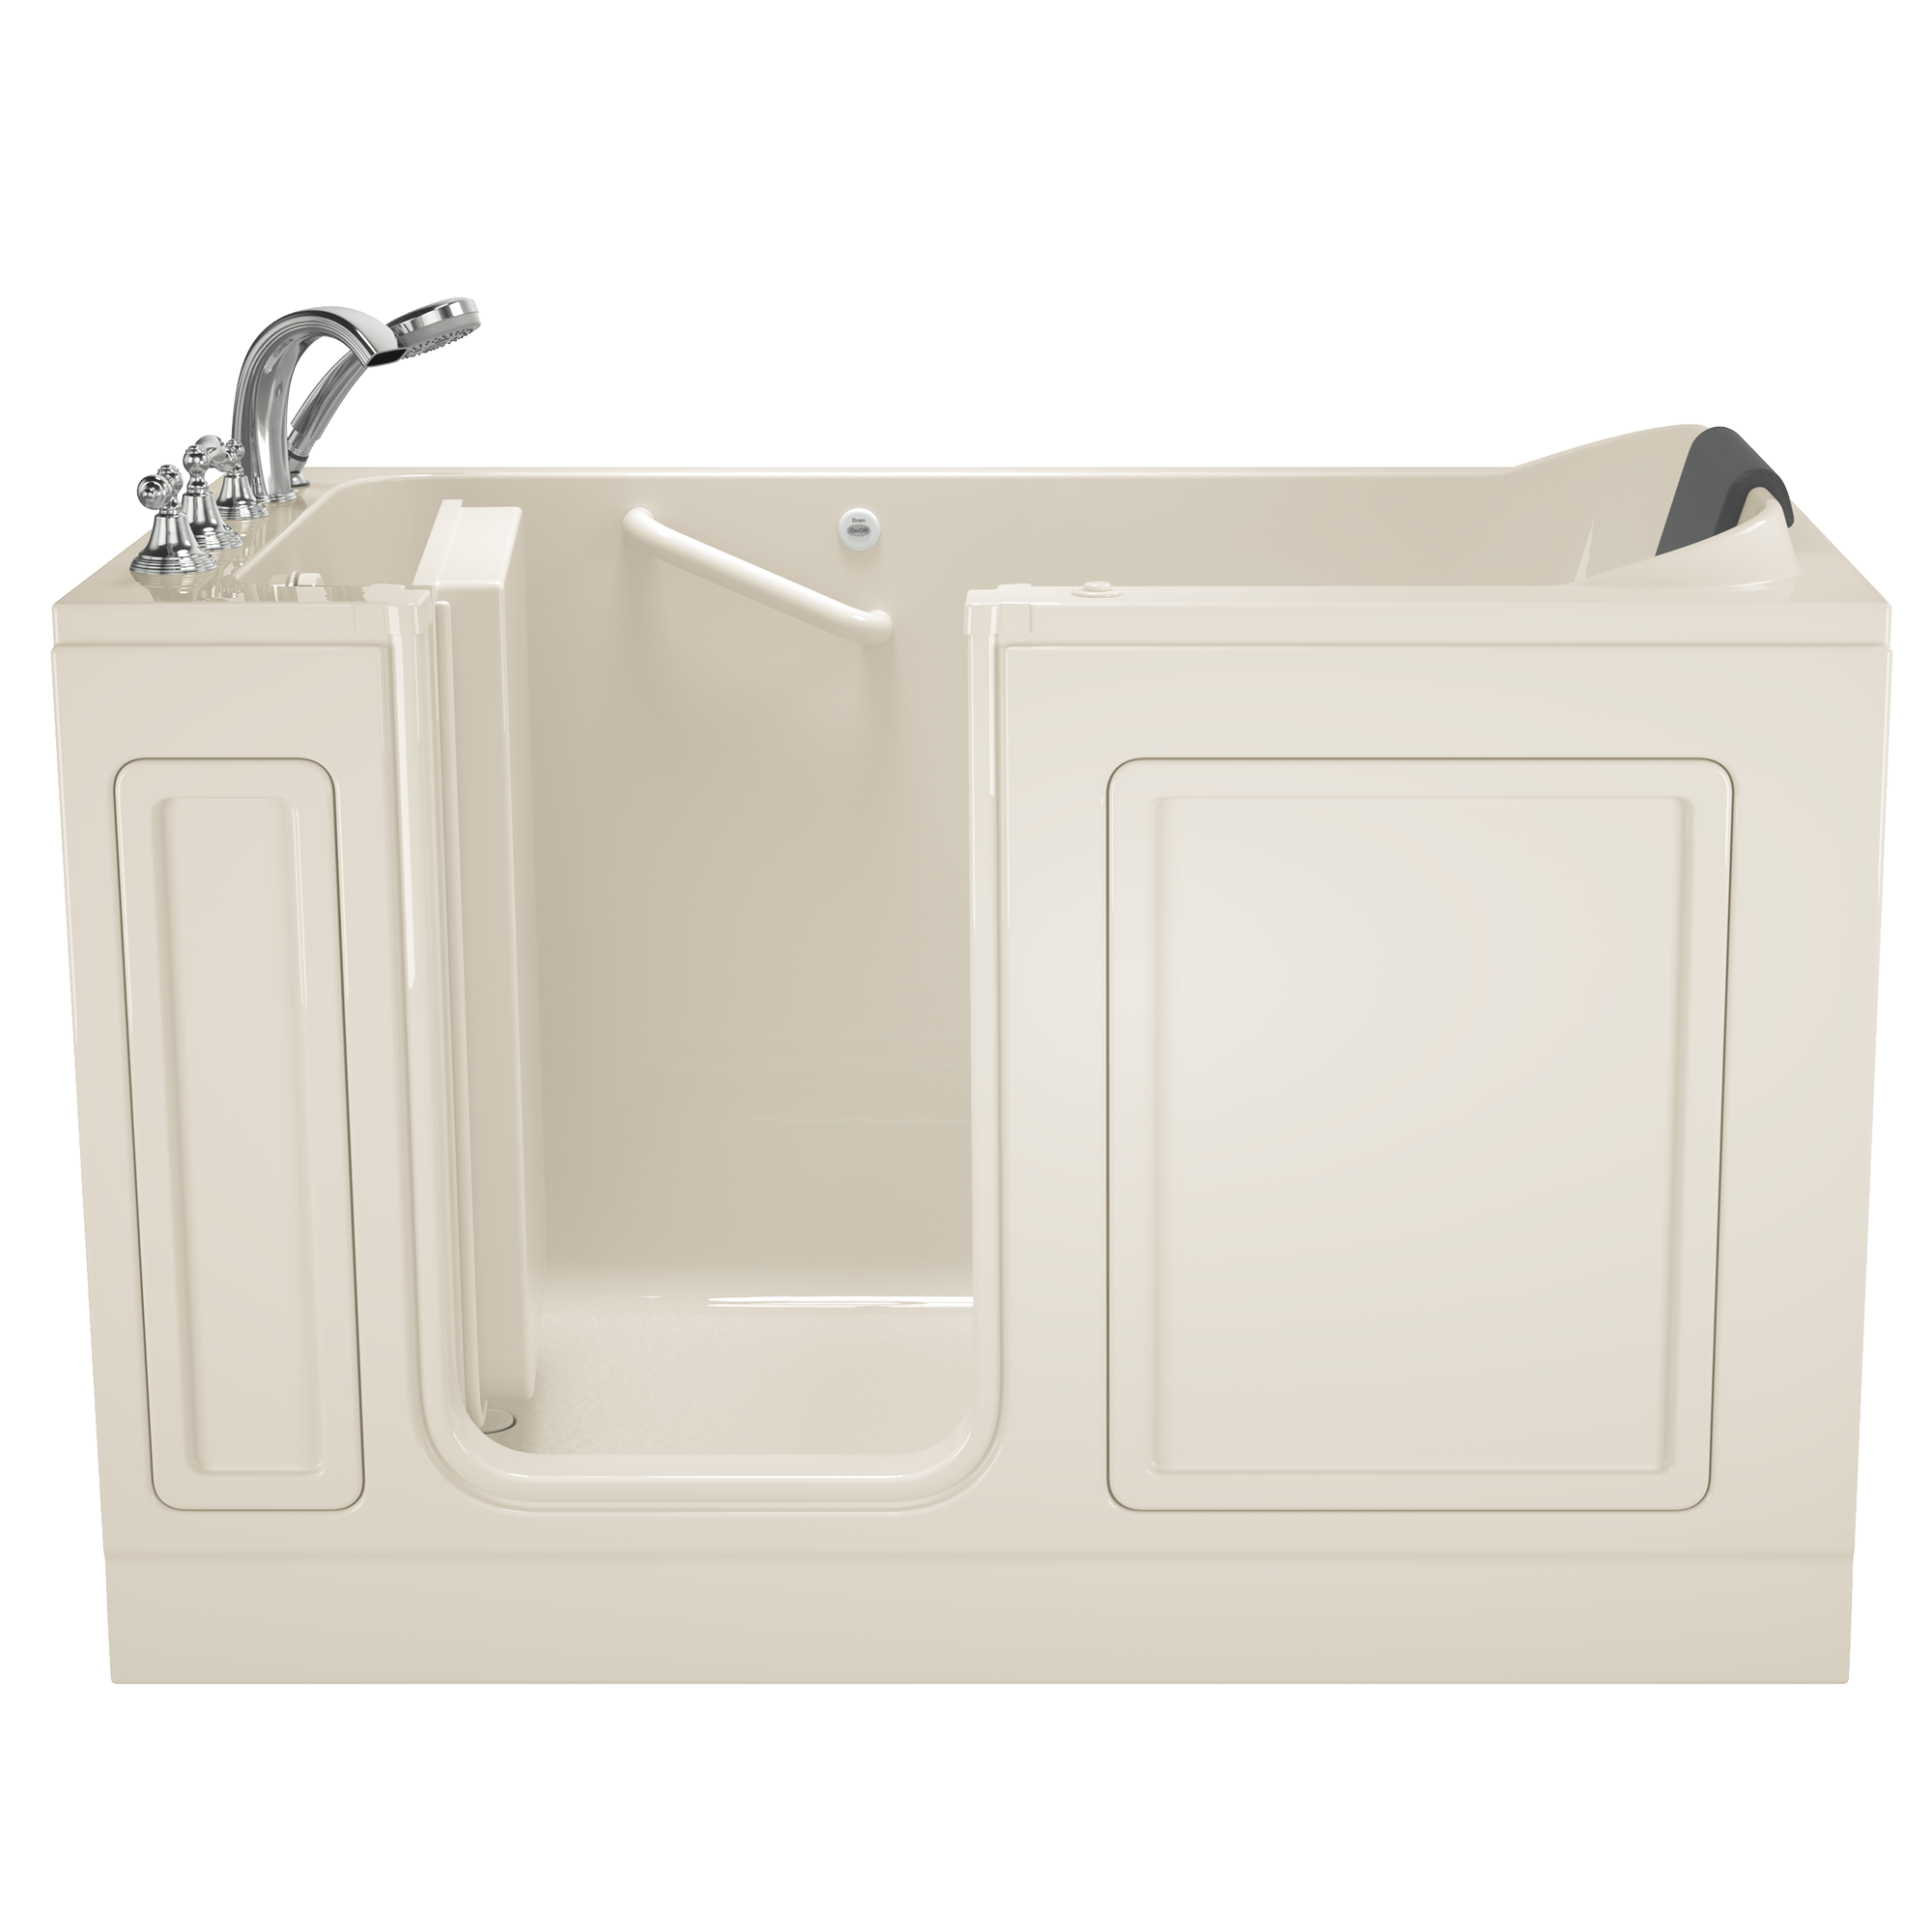 Acrylic Luxury Series 32 x 60 -Inch Walk-in Tub With Whirlpool System - Left-Hand Drain With Faucet